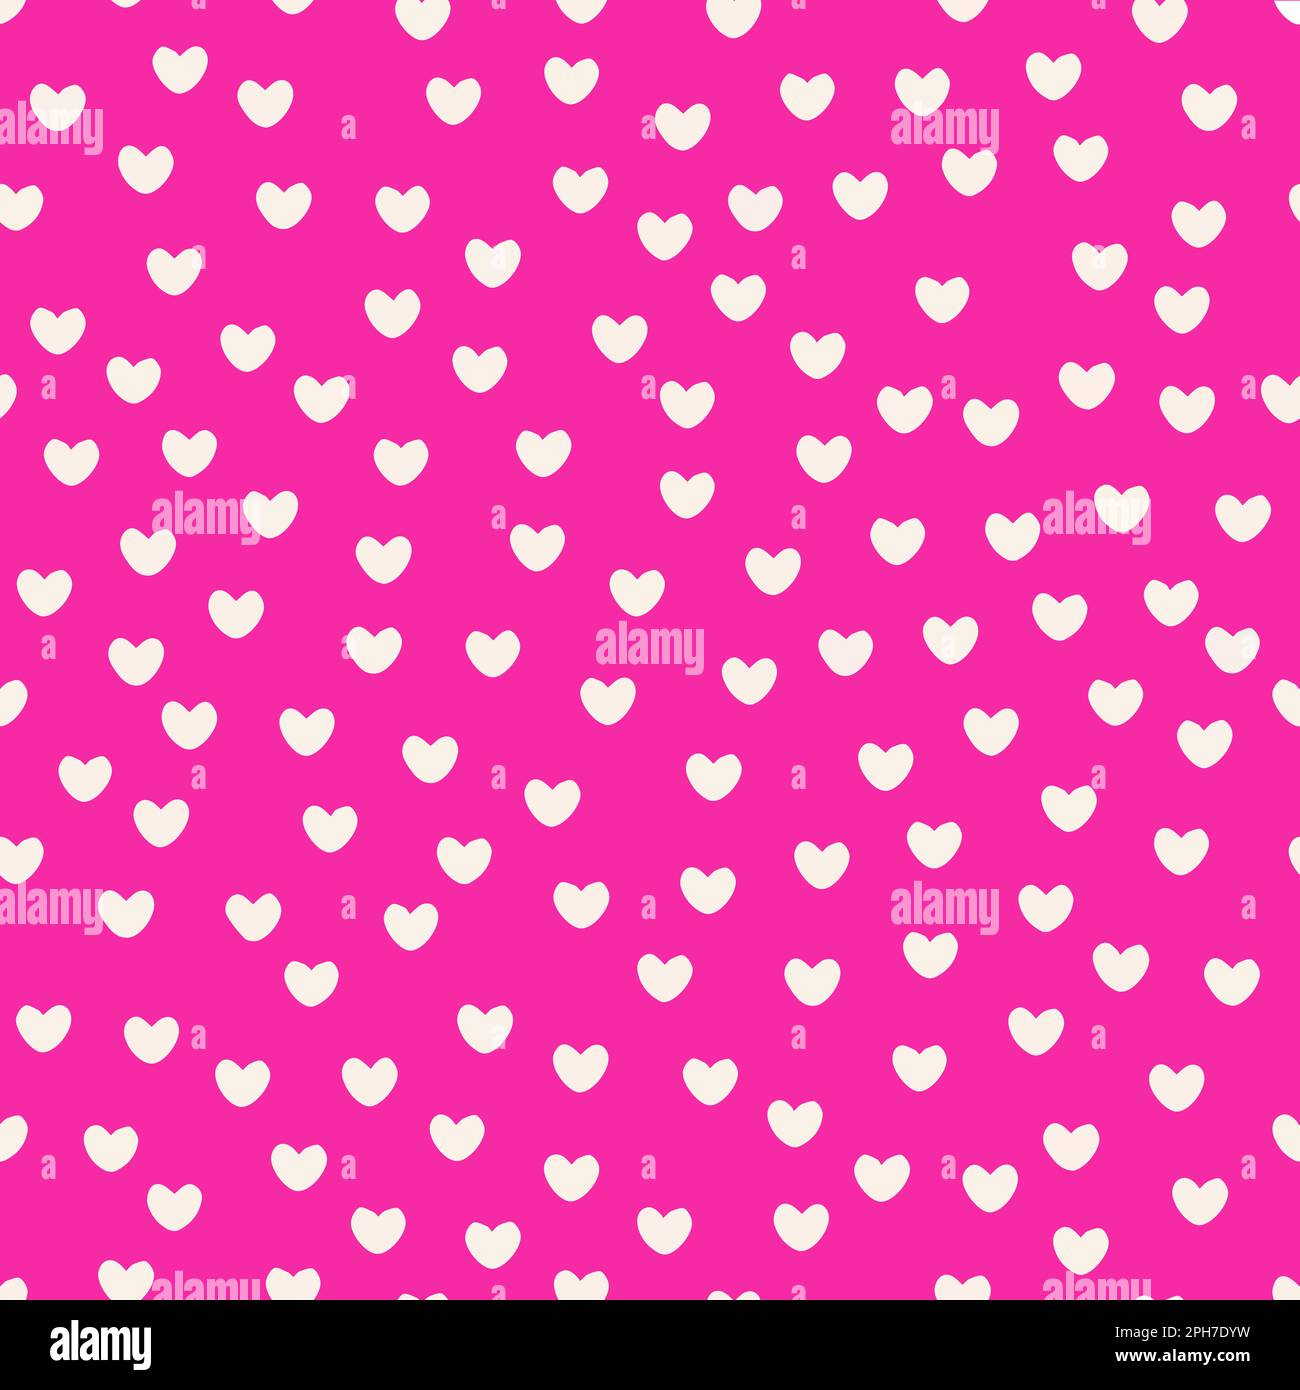 Abstract background of white hearts on a pink background. Vector illustration. Seamless pattern with hearts. Stock Vector